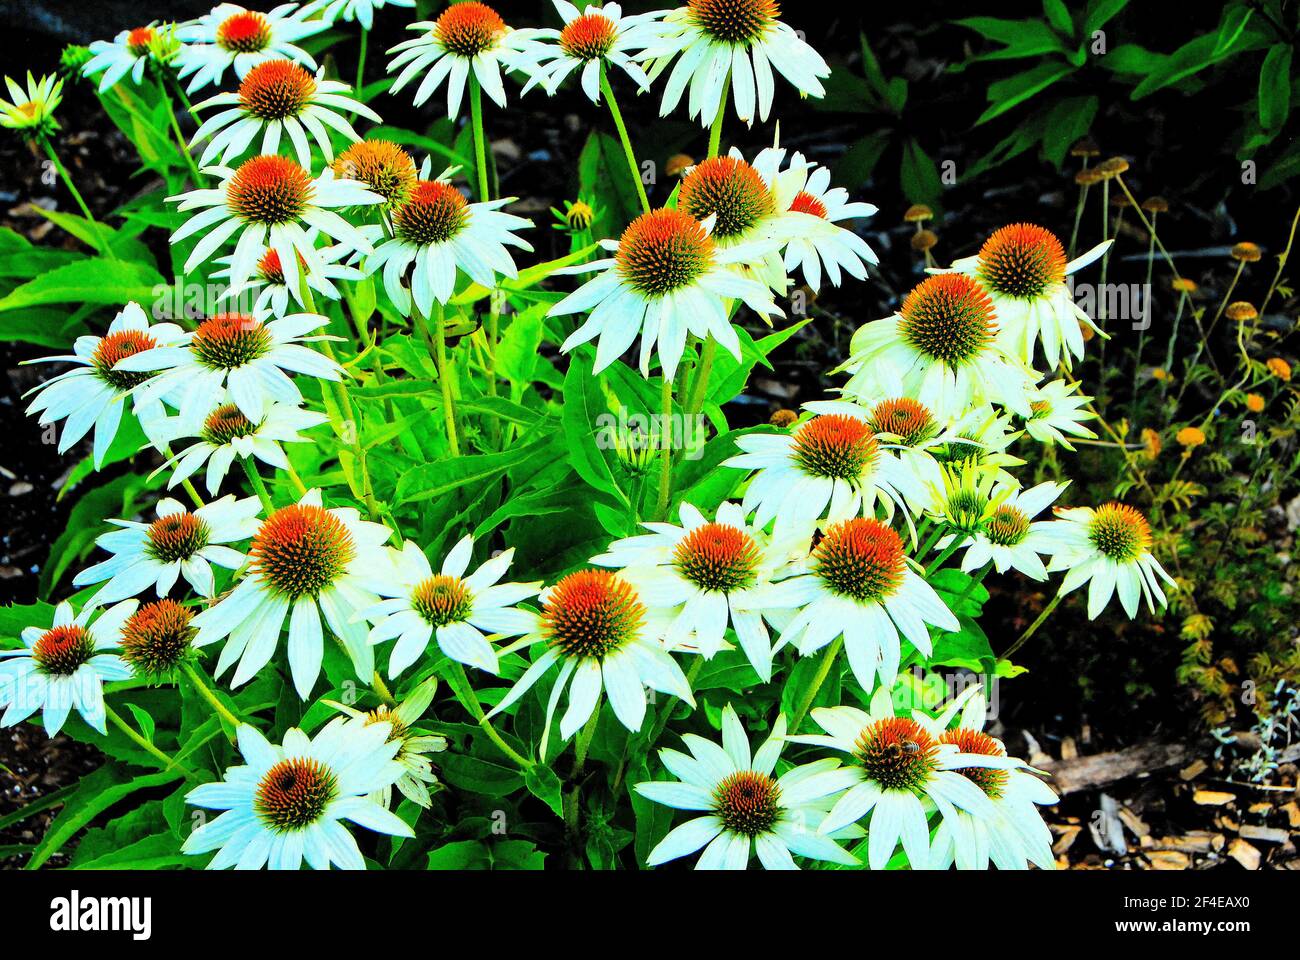 A group of white coneflowers in a public garden on a summer's day. Stock Photo